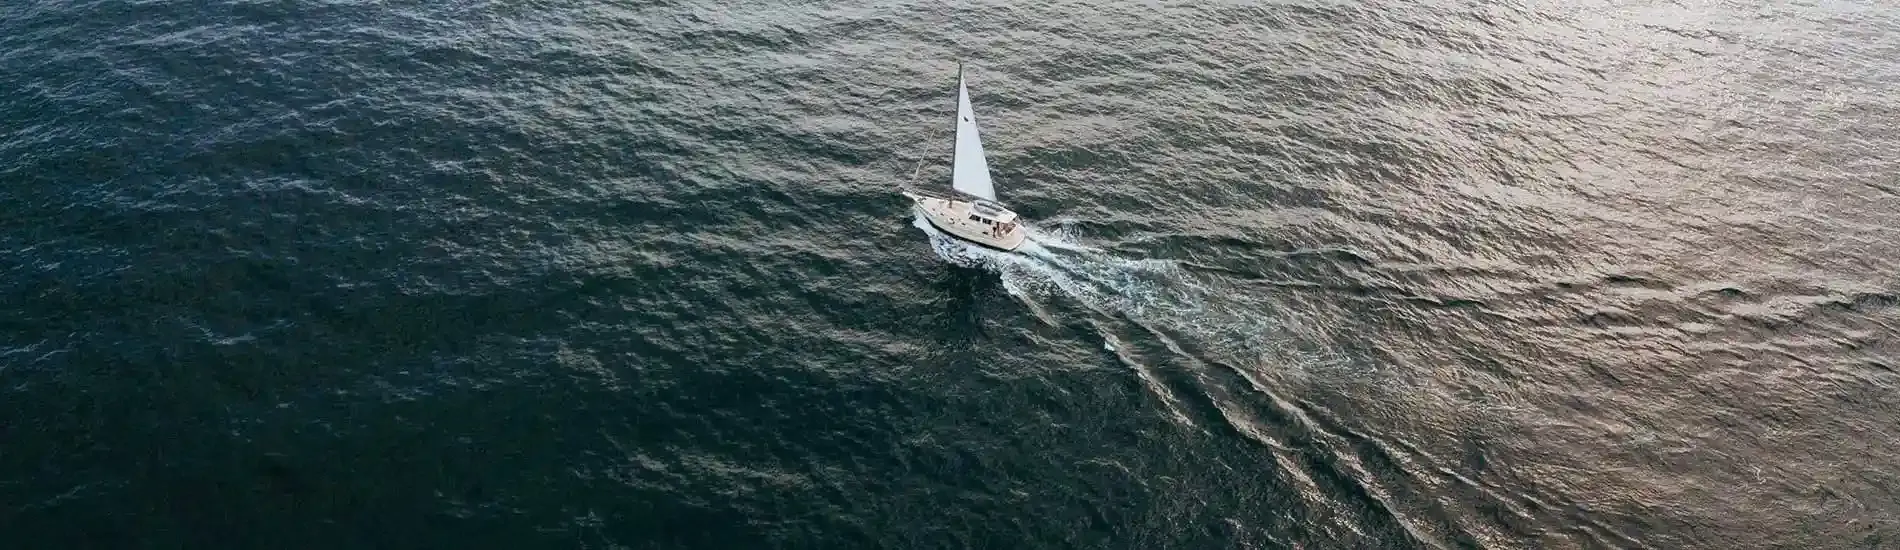 Aerial perspective of a sail boat on the water